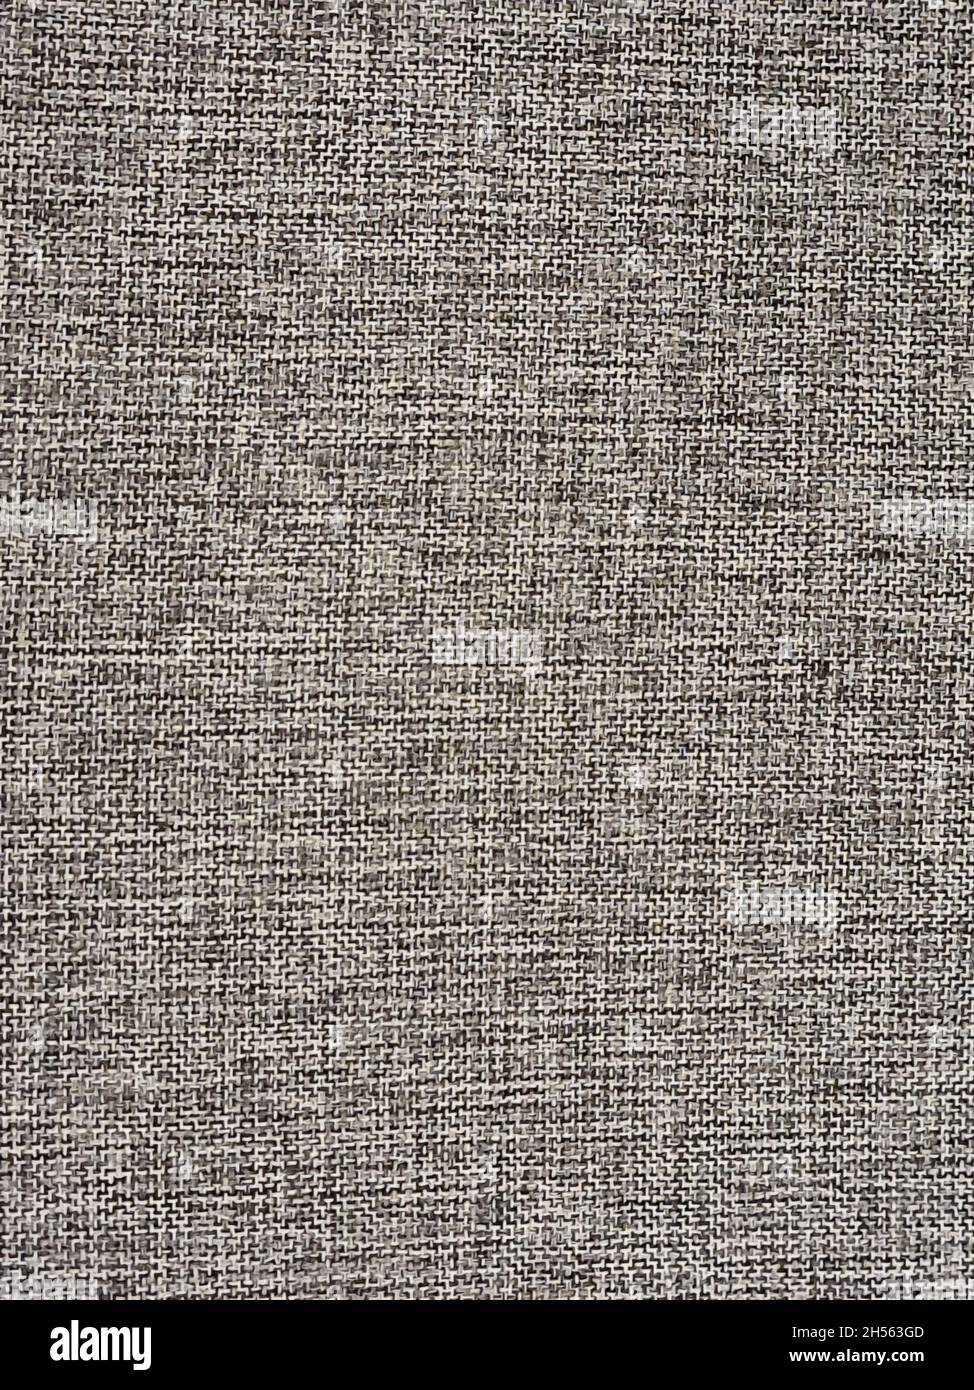 Linen fabric, gray fabric background with discreet details. Full screen. Stock Photo